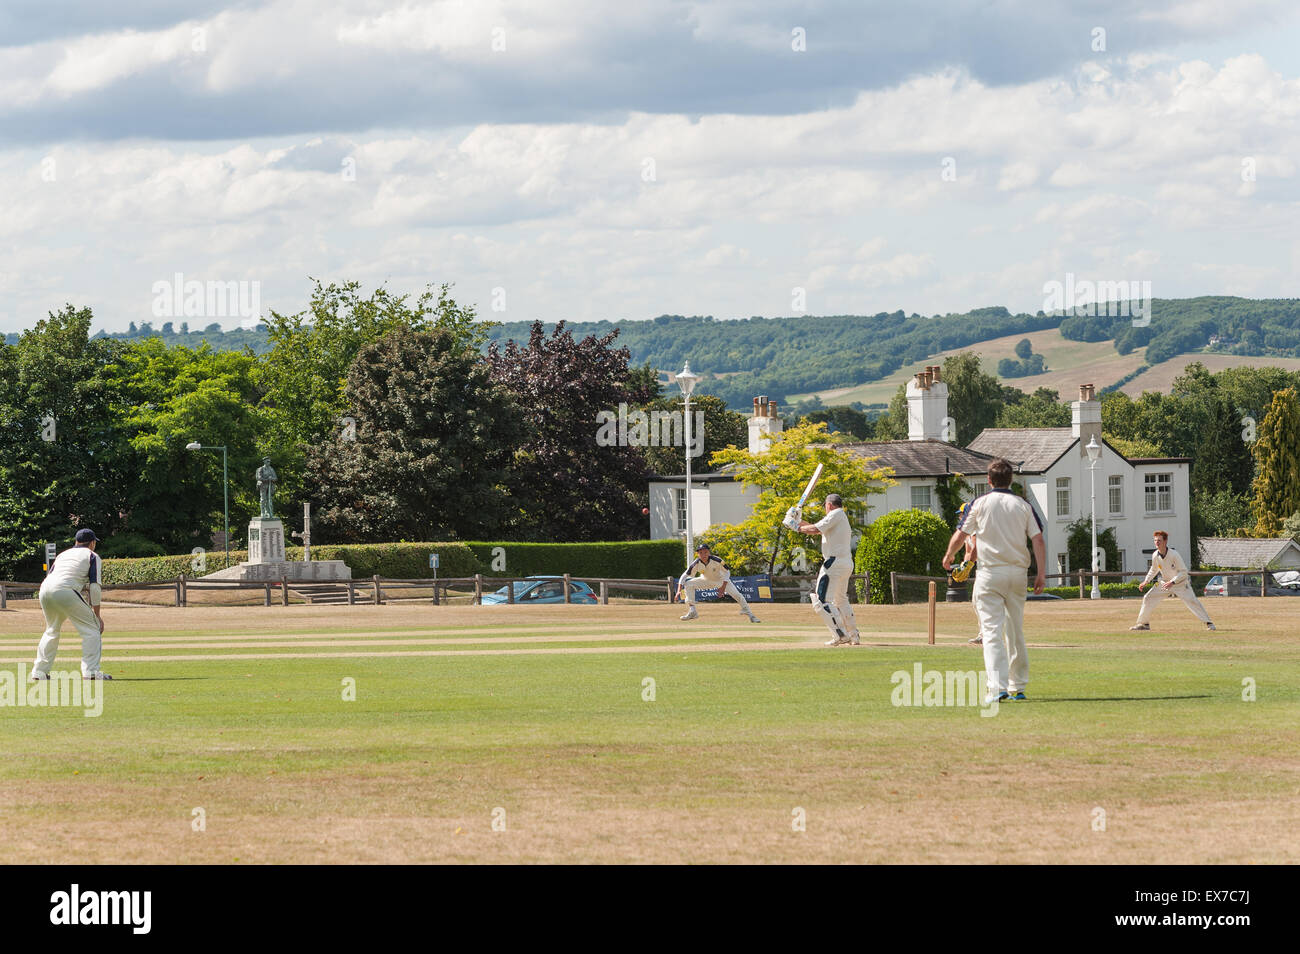 Typically British a game of cricket played on The Vine Sevenoaks surrounded by the 7 oaks with north downs and club house Stock Photo